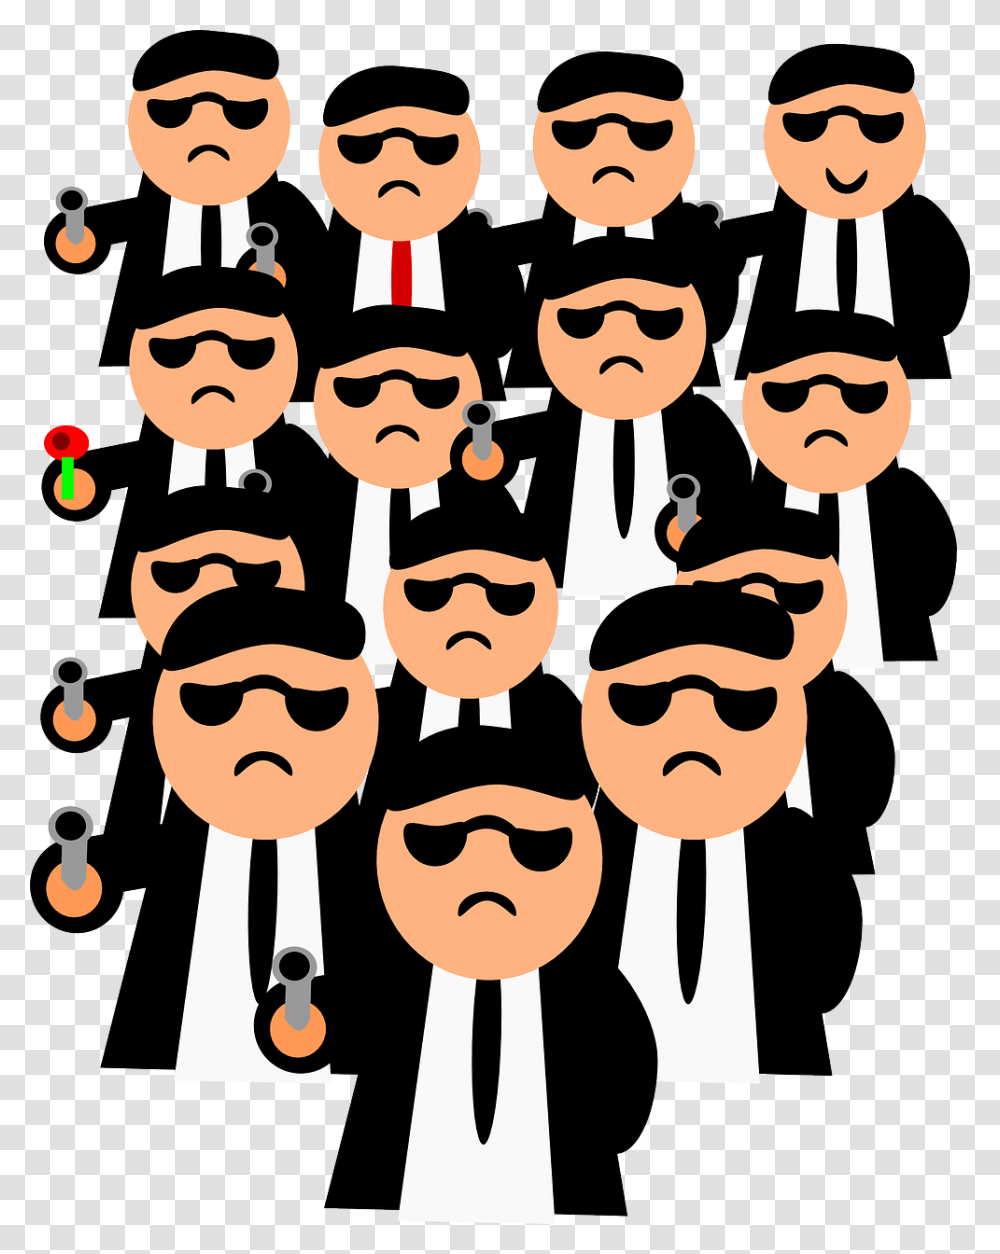 Criminal Organized Crime Frames Gang Of Robbers Cartoon, Crowd, Face, Sunglasses, Audience Transparent Png